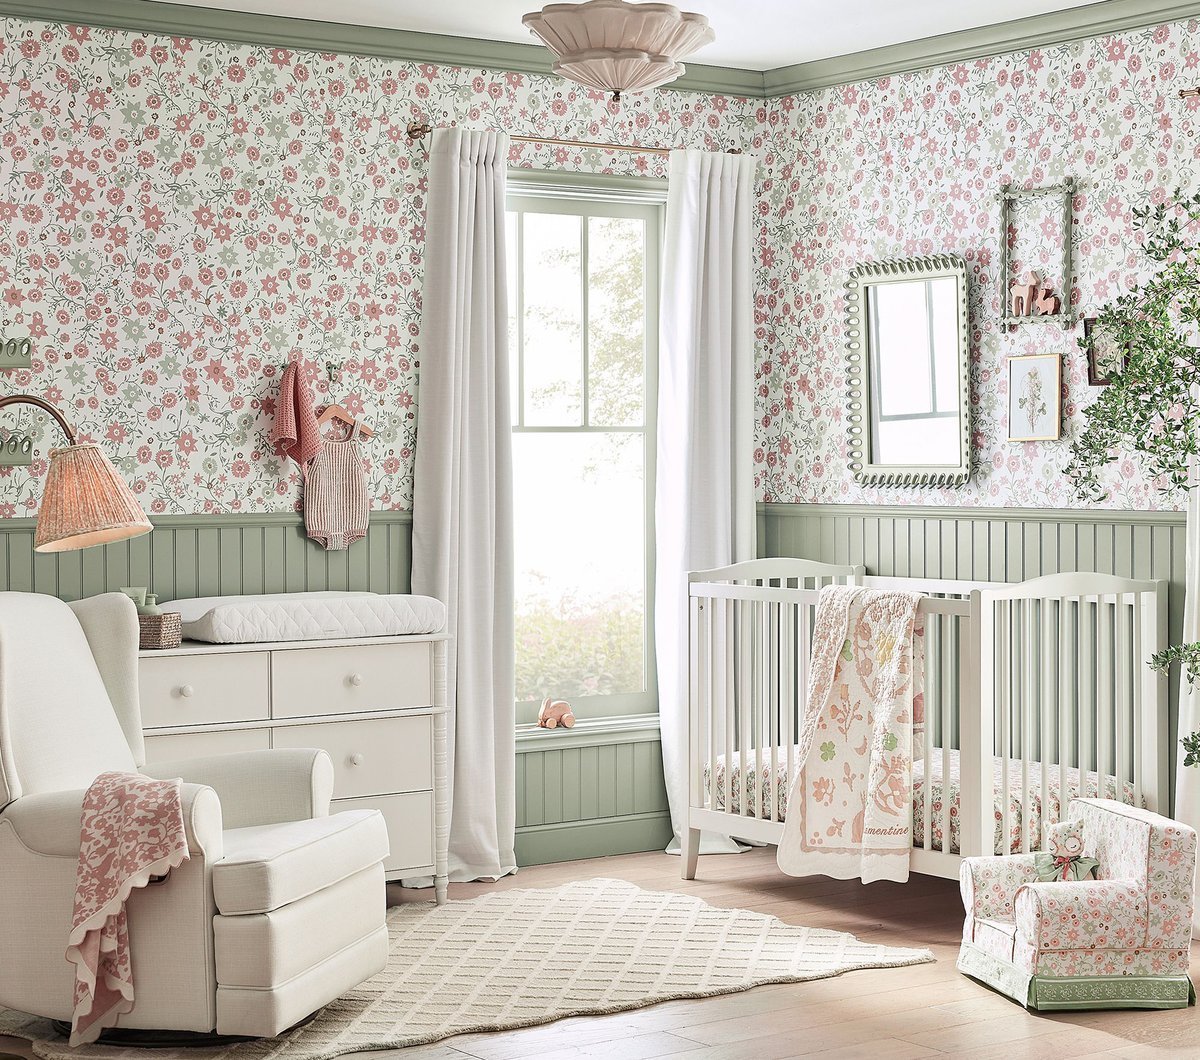 A child's nursery in green and floral patterns.